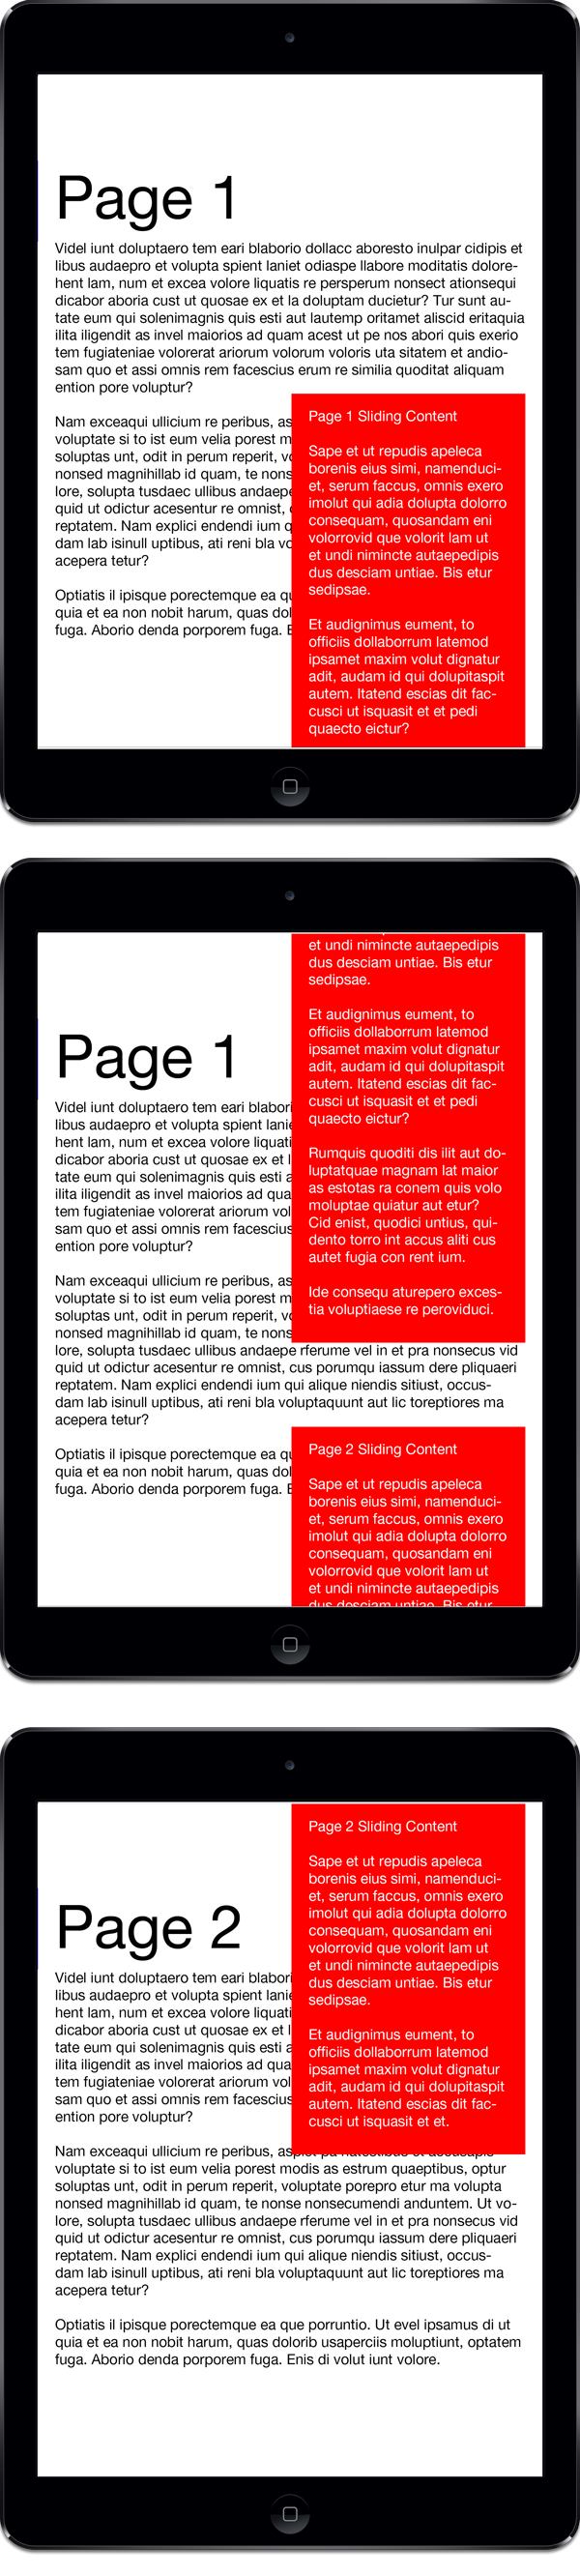 Review your document and swipe up to see how the Snapping feature snaps the A-Layer content on Page 2 into place.